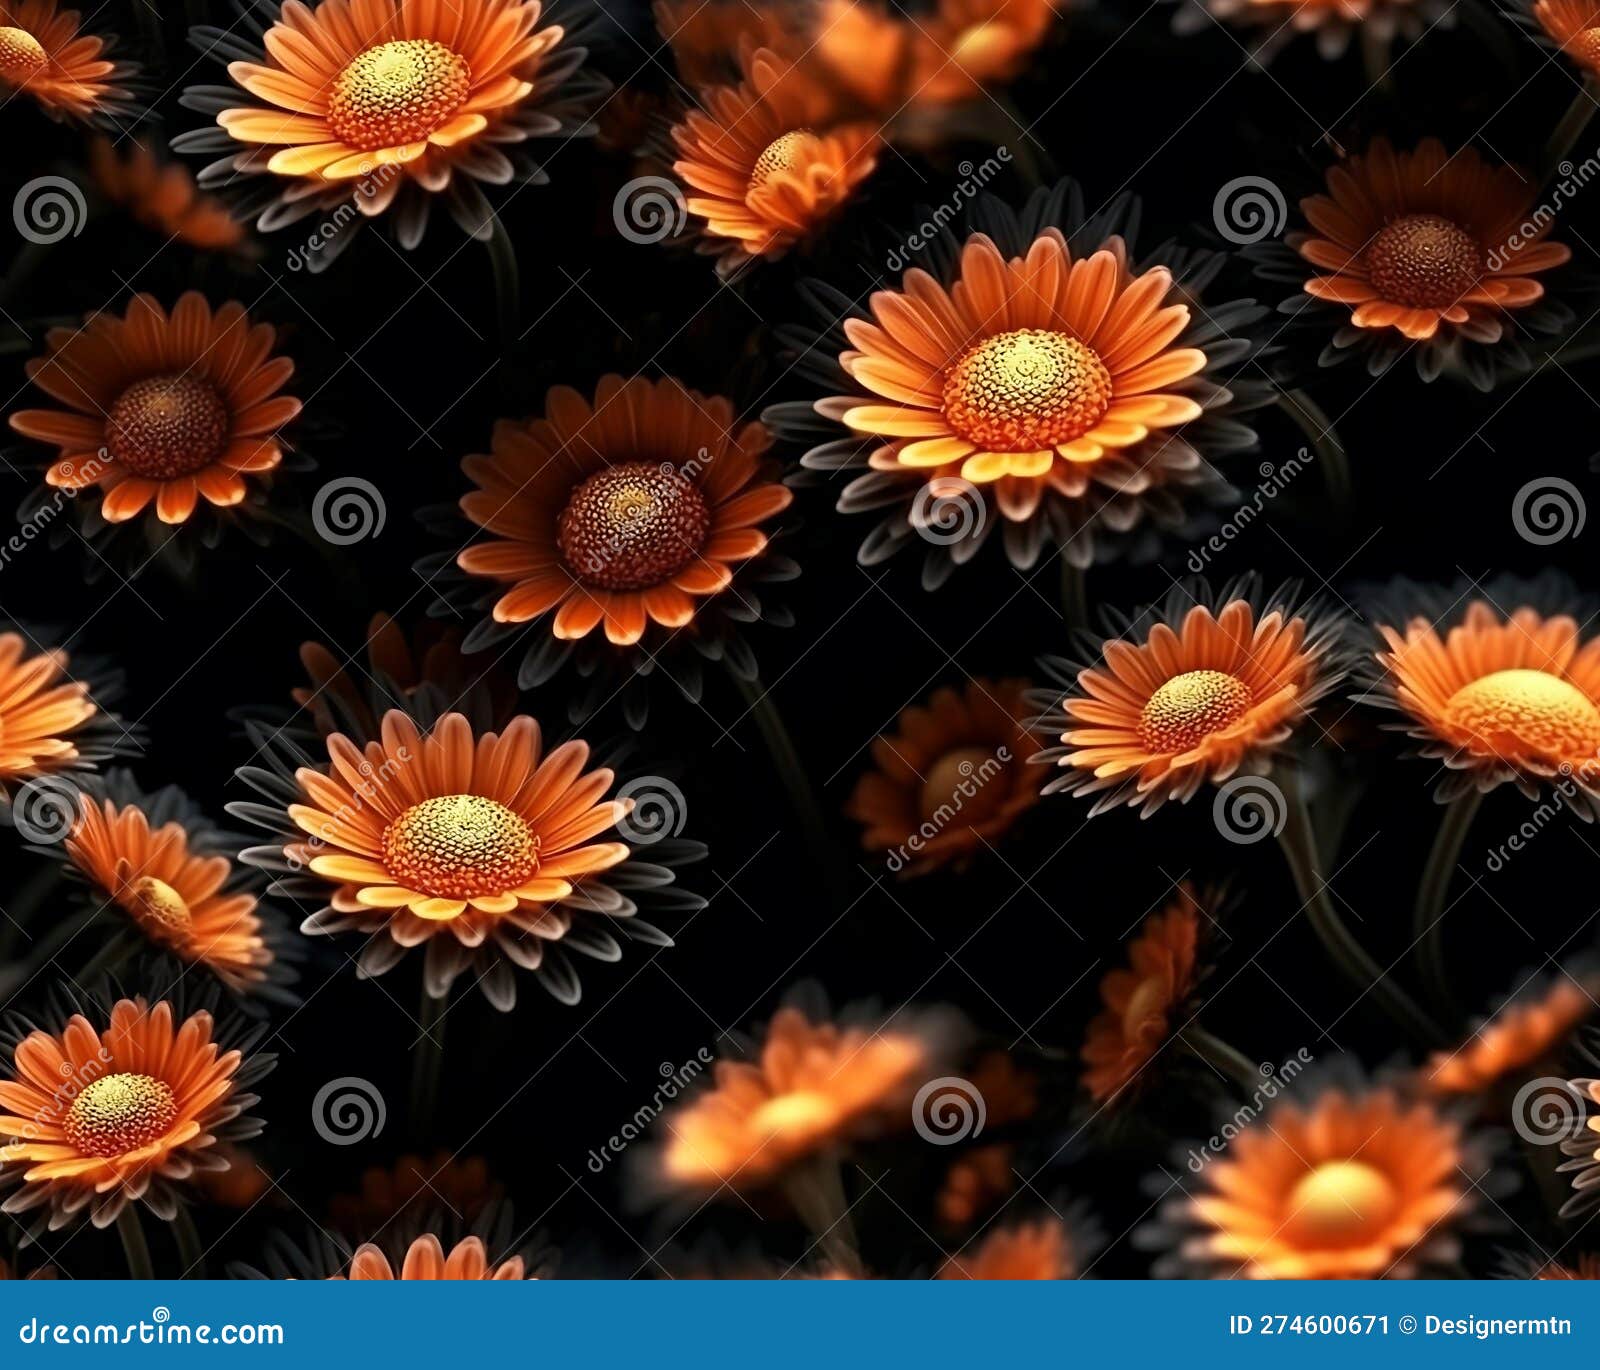 3,896,879 Wild Flowers Images, Stock Photos, 3D objects, & Vectors